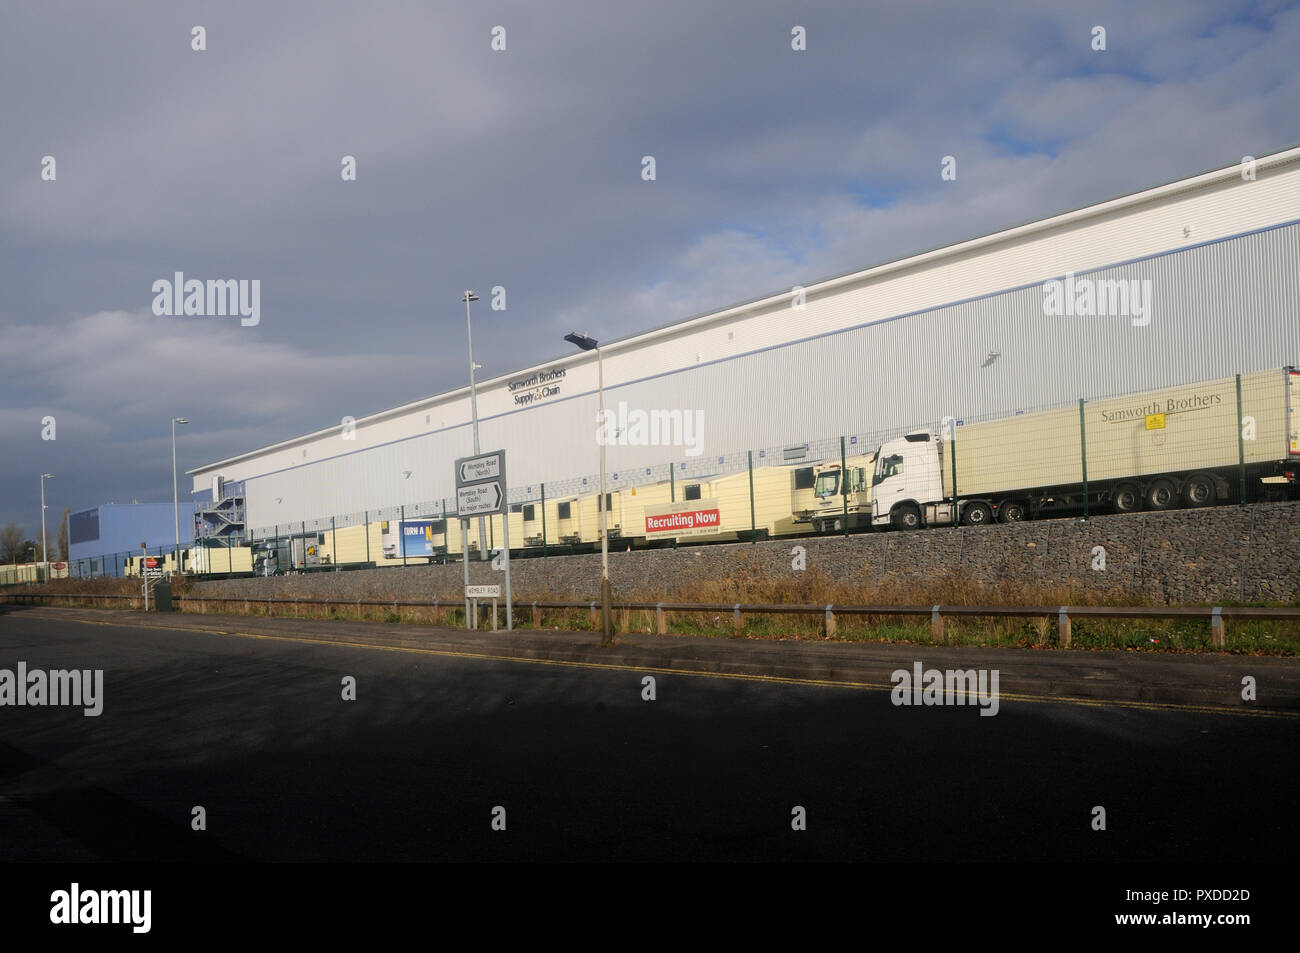 Samworth Brothers' new distribution centre, built on the site of the British Shoe factory, in Leicester, Leicestershire, England Stock Photo